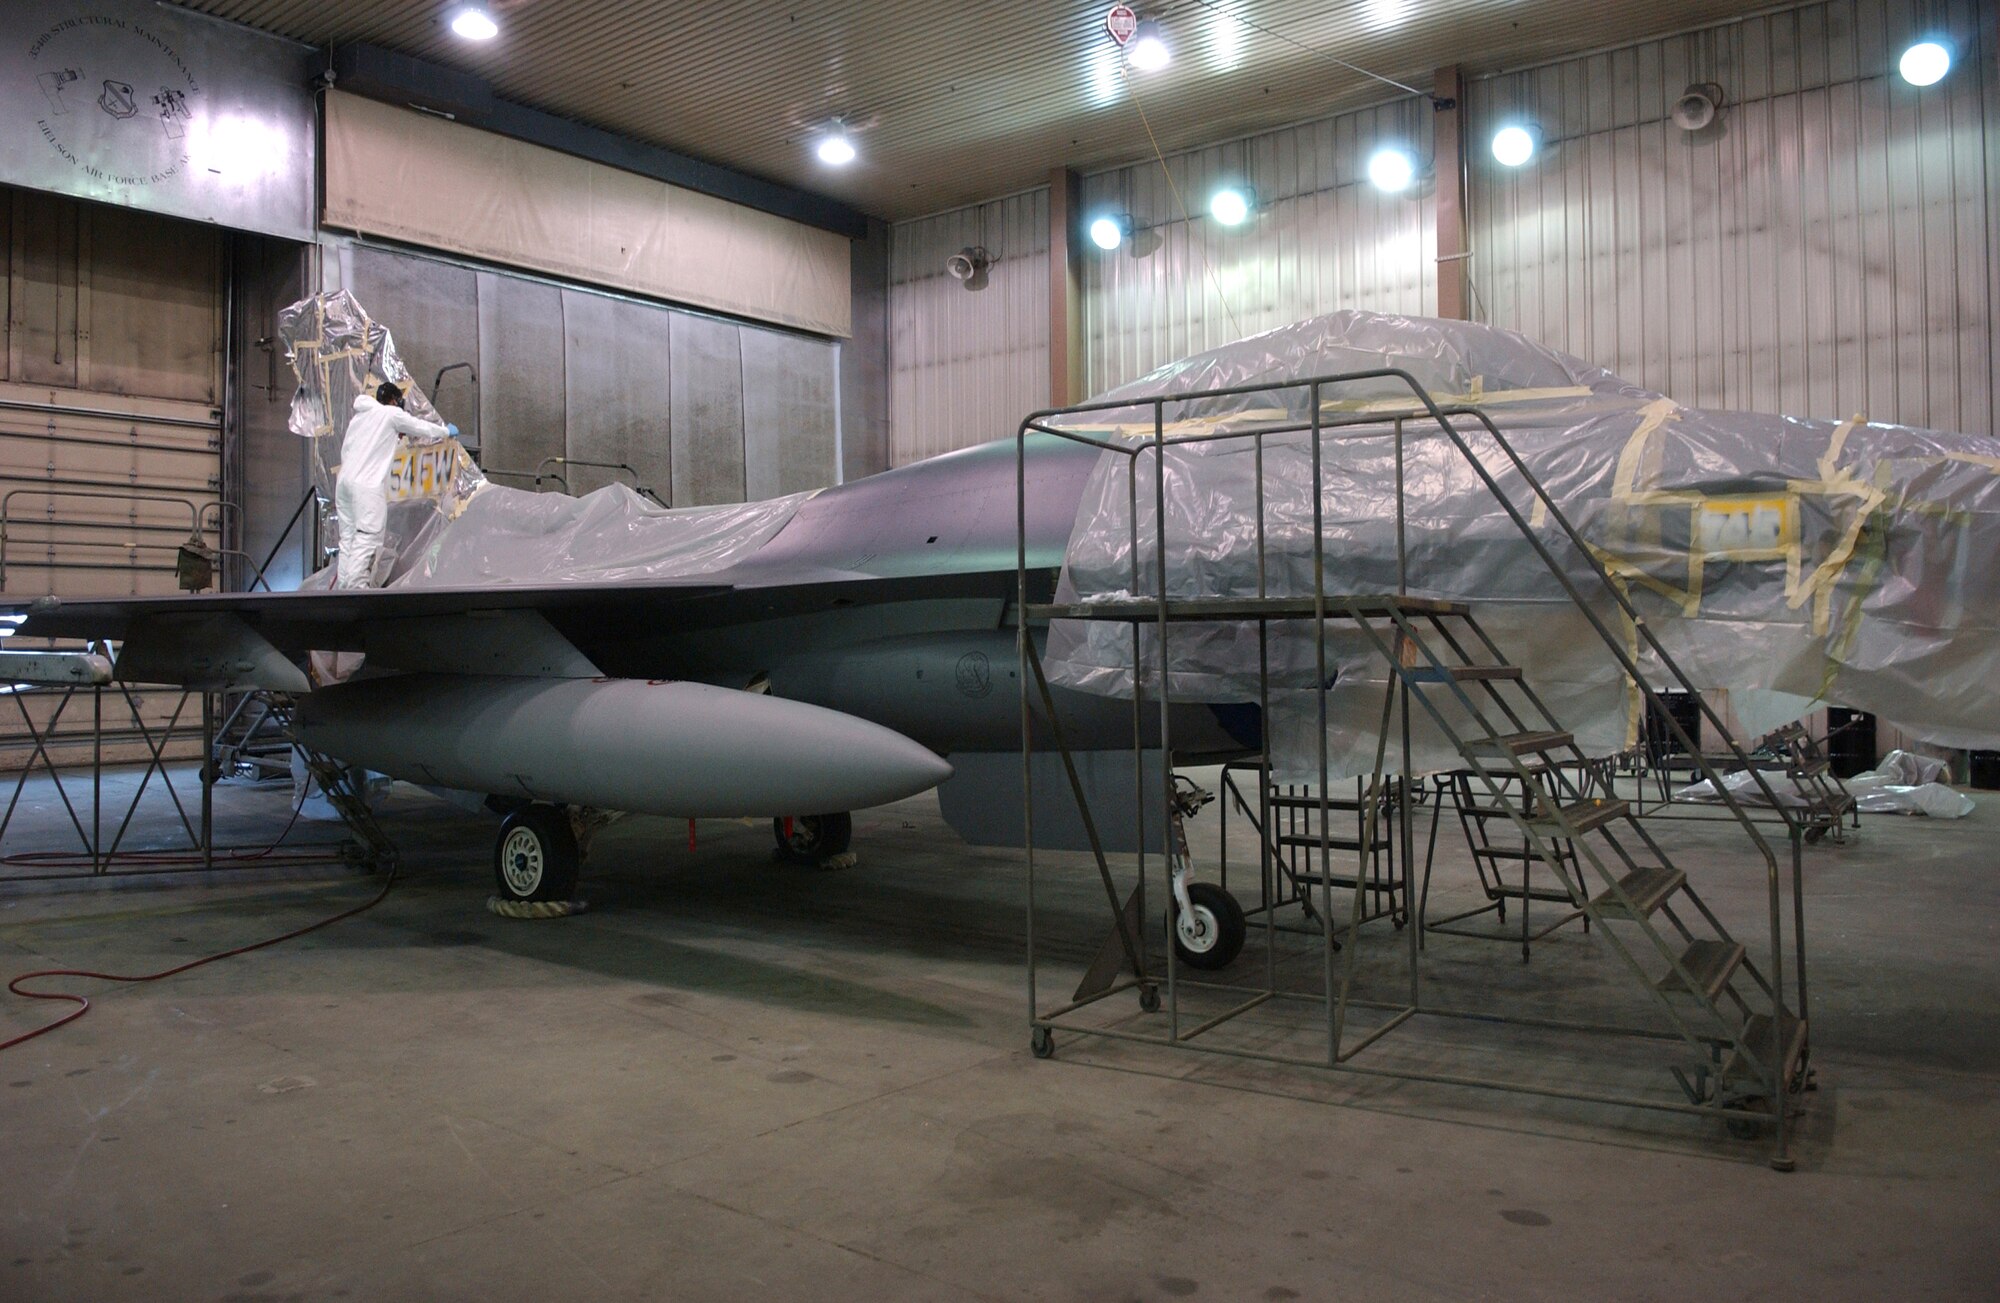 EIELSON AIR FORCE BASE, Alaska -- 'ICEMAN One', the 354th Wing Commanders' F-16 Fighting Falcon, receives a new tail design and a paint touch up here April 12.  The paint job will help prevent future corrosion.  (U.S. Air Force Photo by Airman 1st Class Jonathan Snyder)

